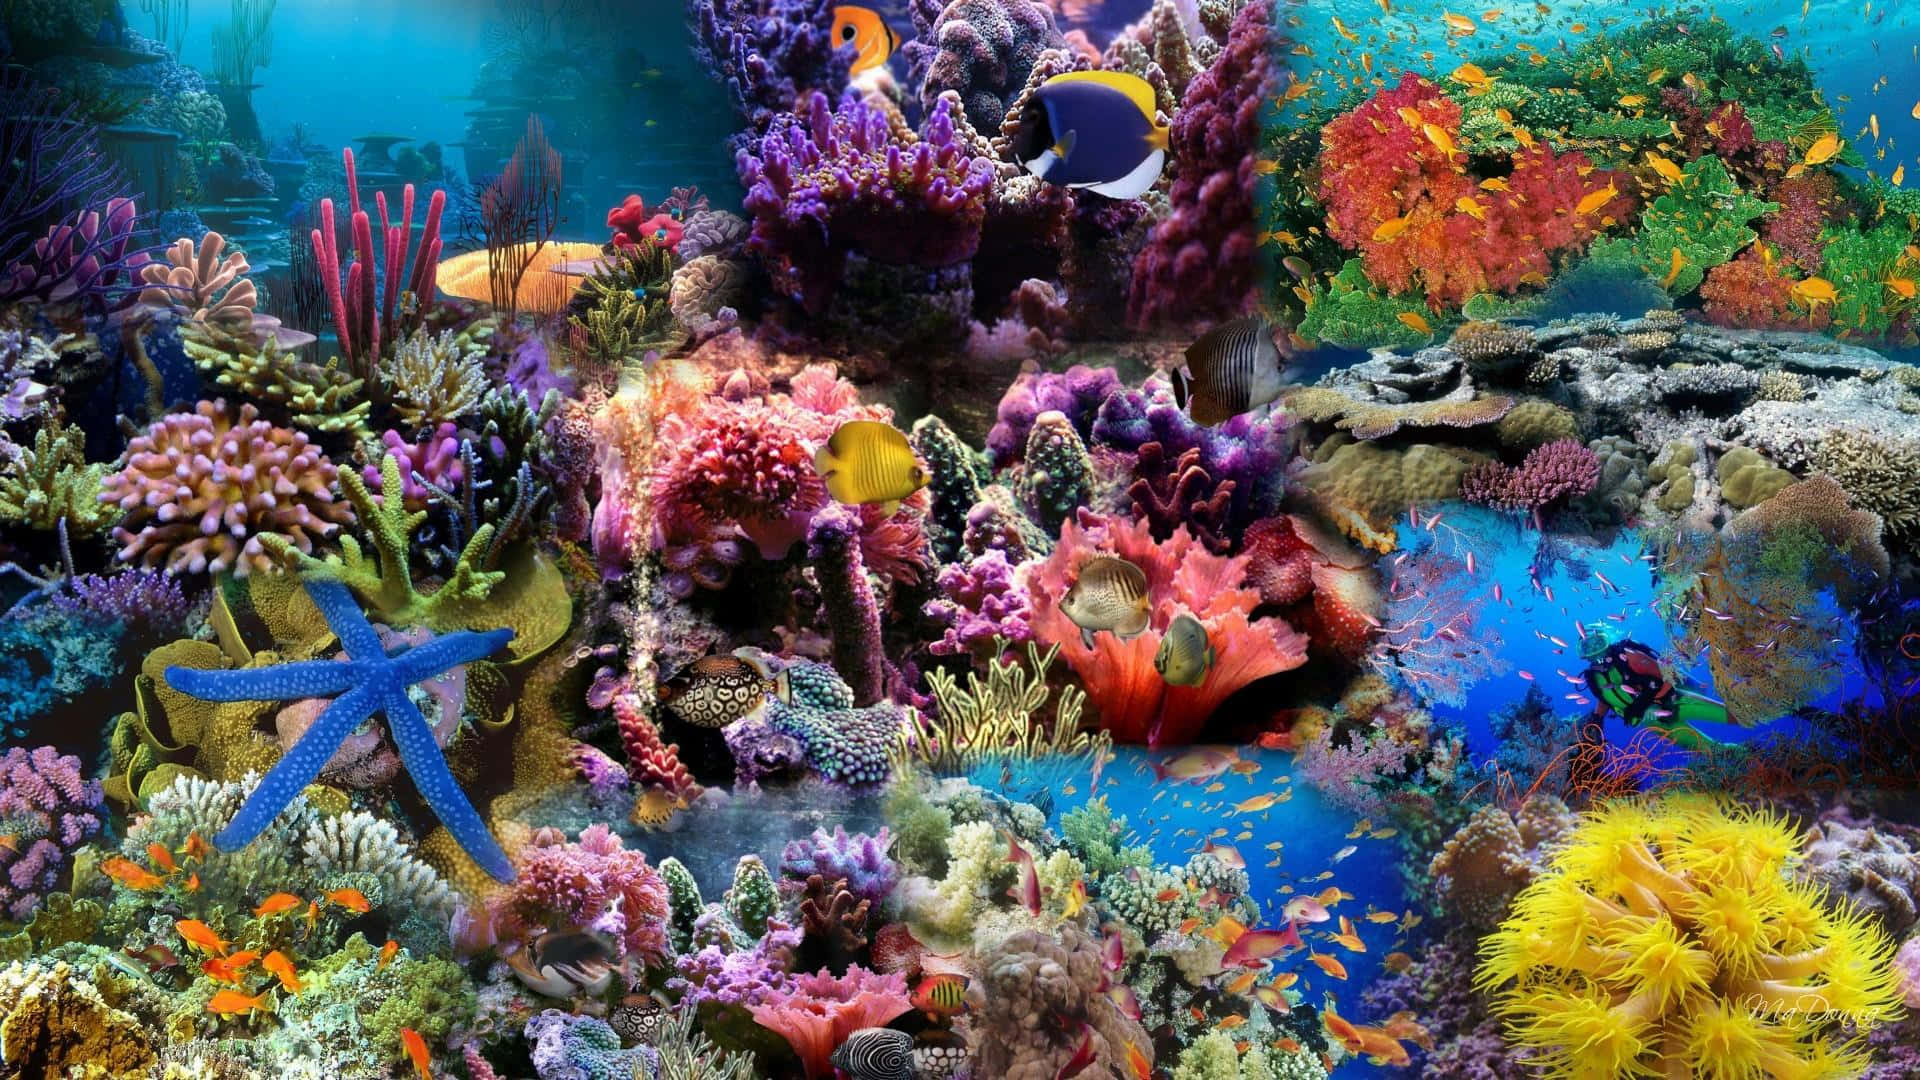 A Collage Of Colorful Corals And Fish